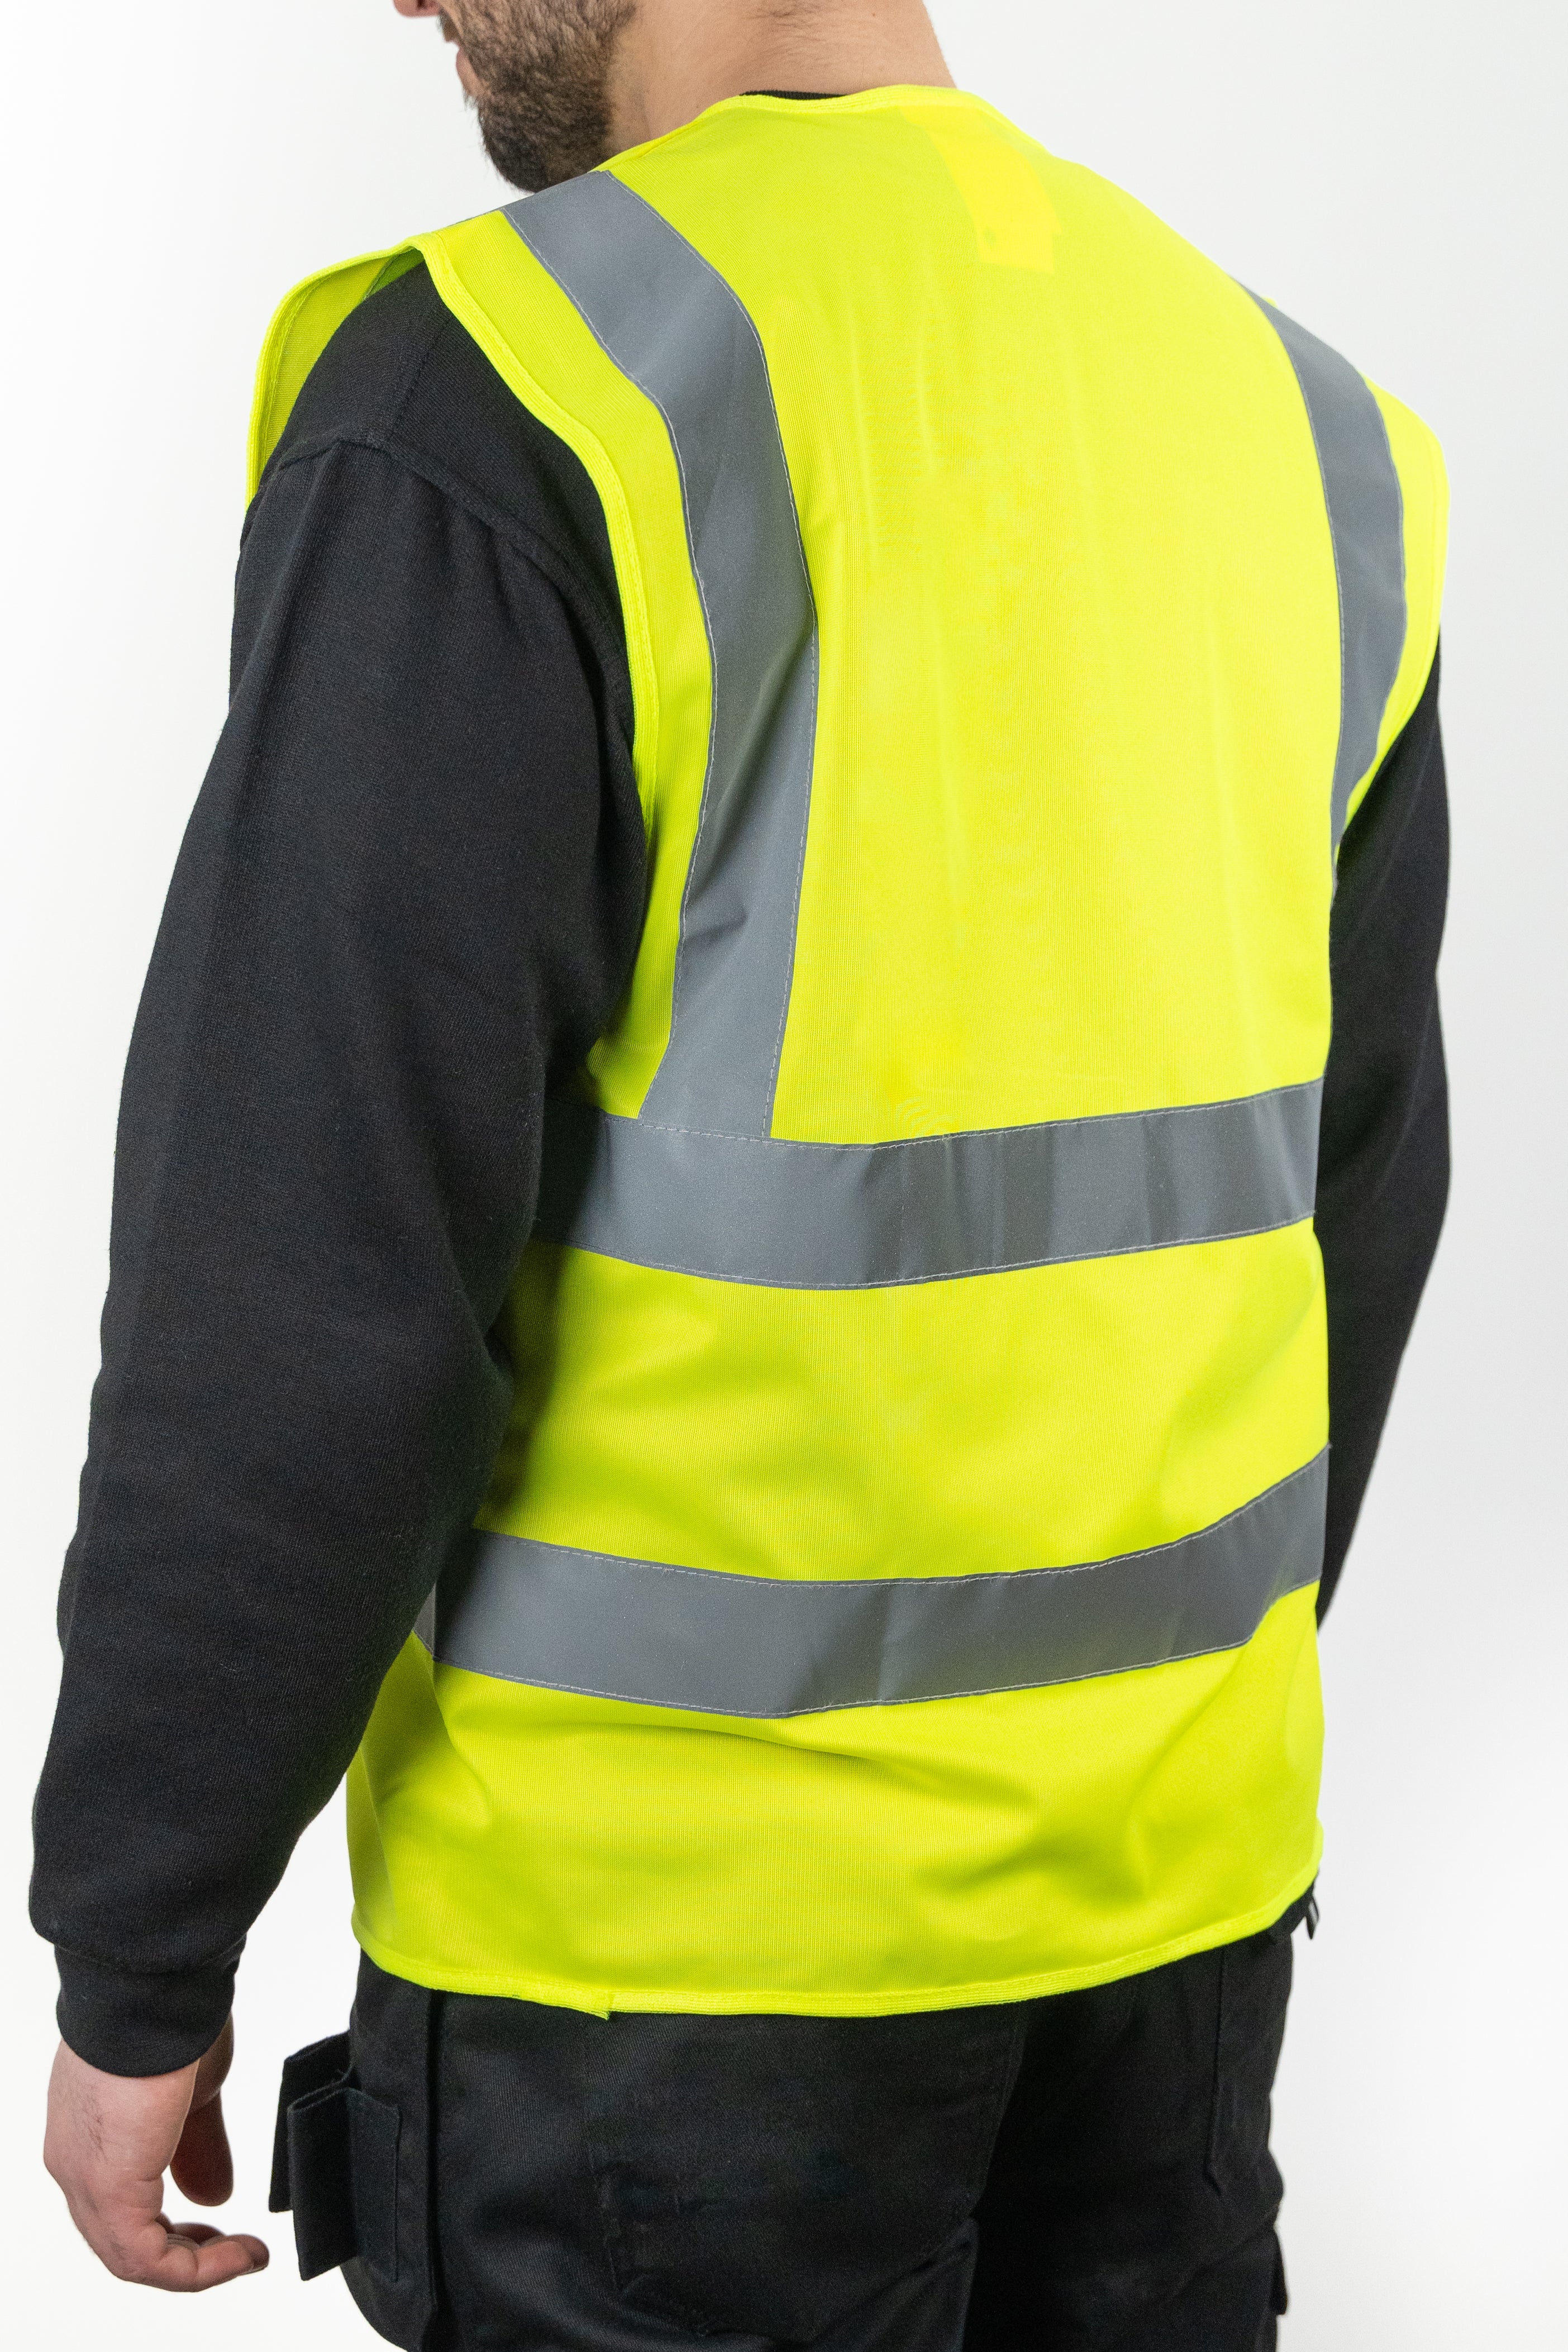 hi-vis yellow vest rear view with silver reflective strips